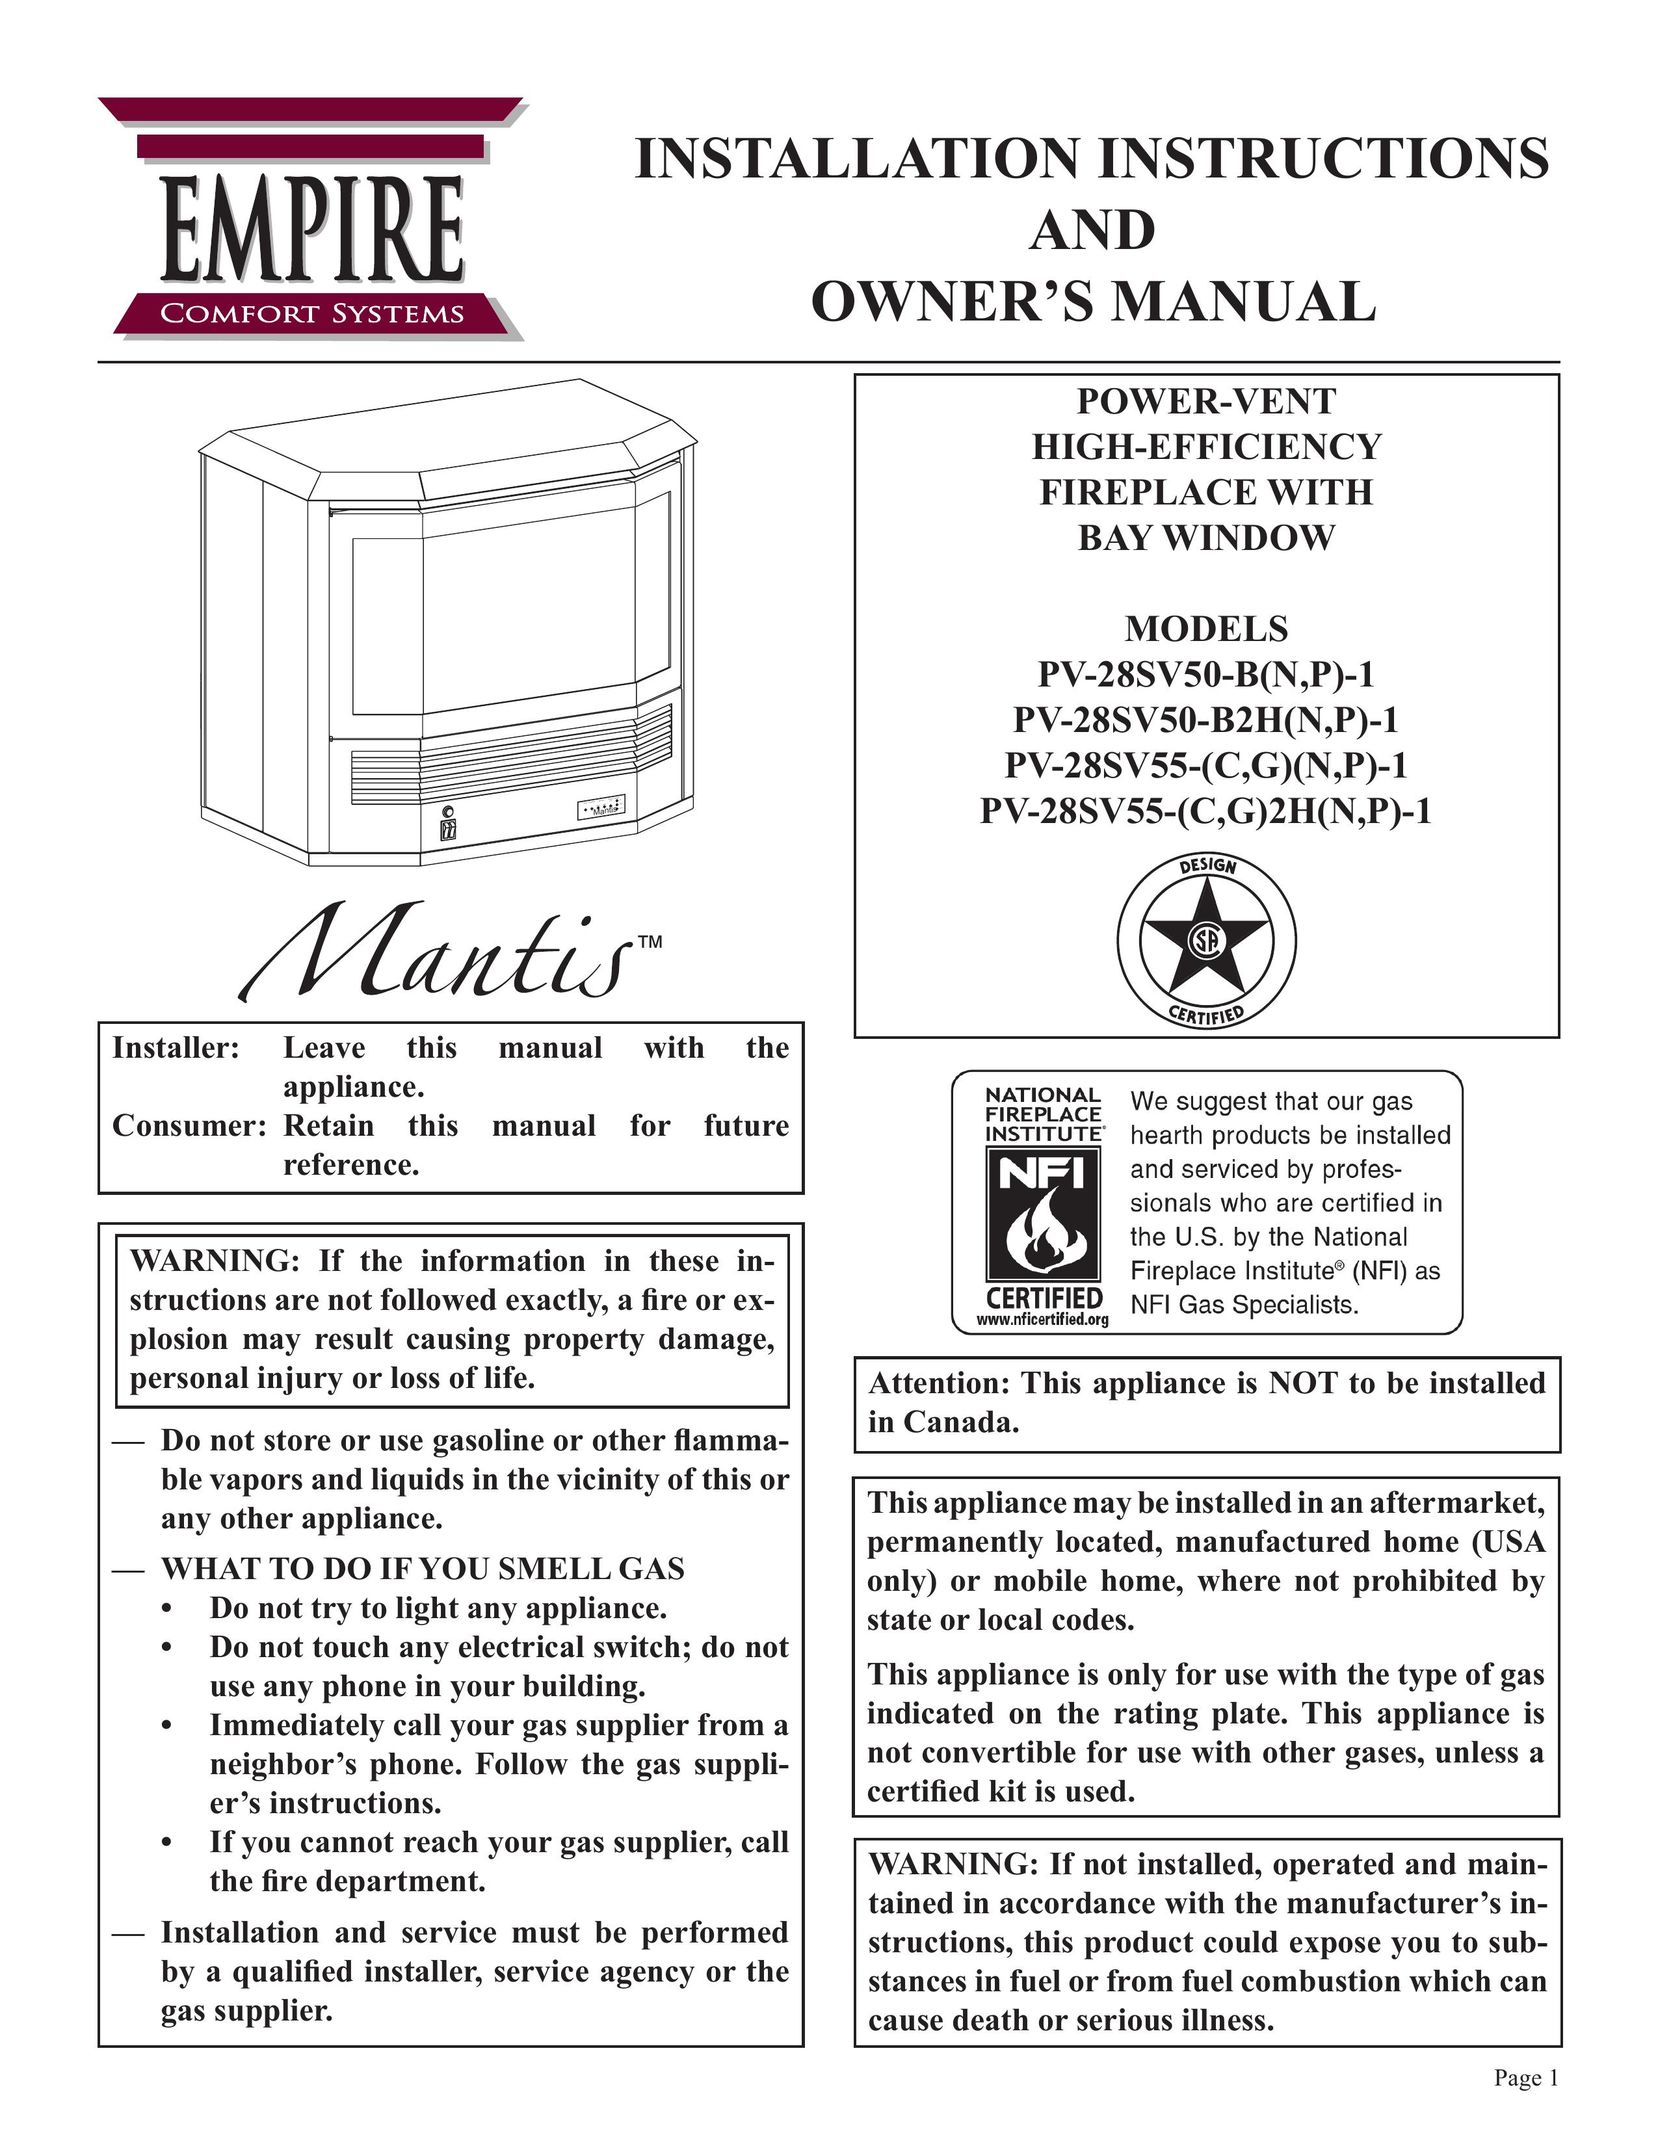 Empire Comfort Systems PV-28SV50-B(N,P)-1 Indoor Fireplace User Manual